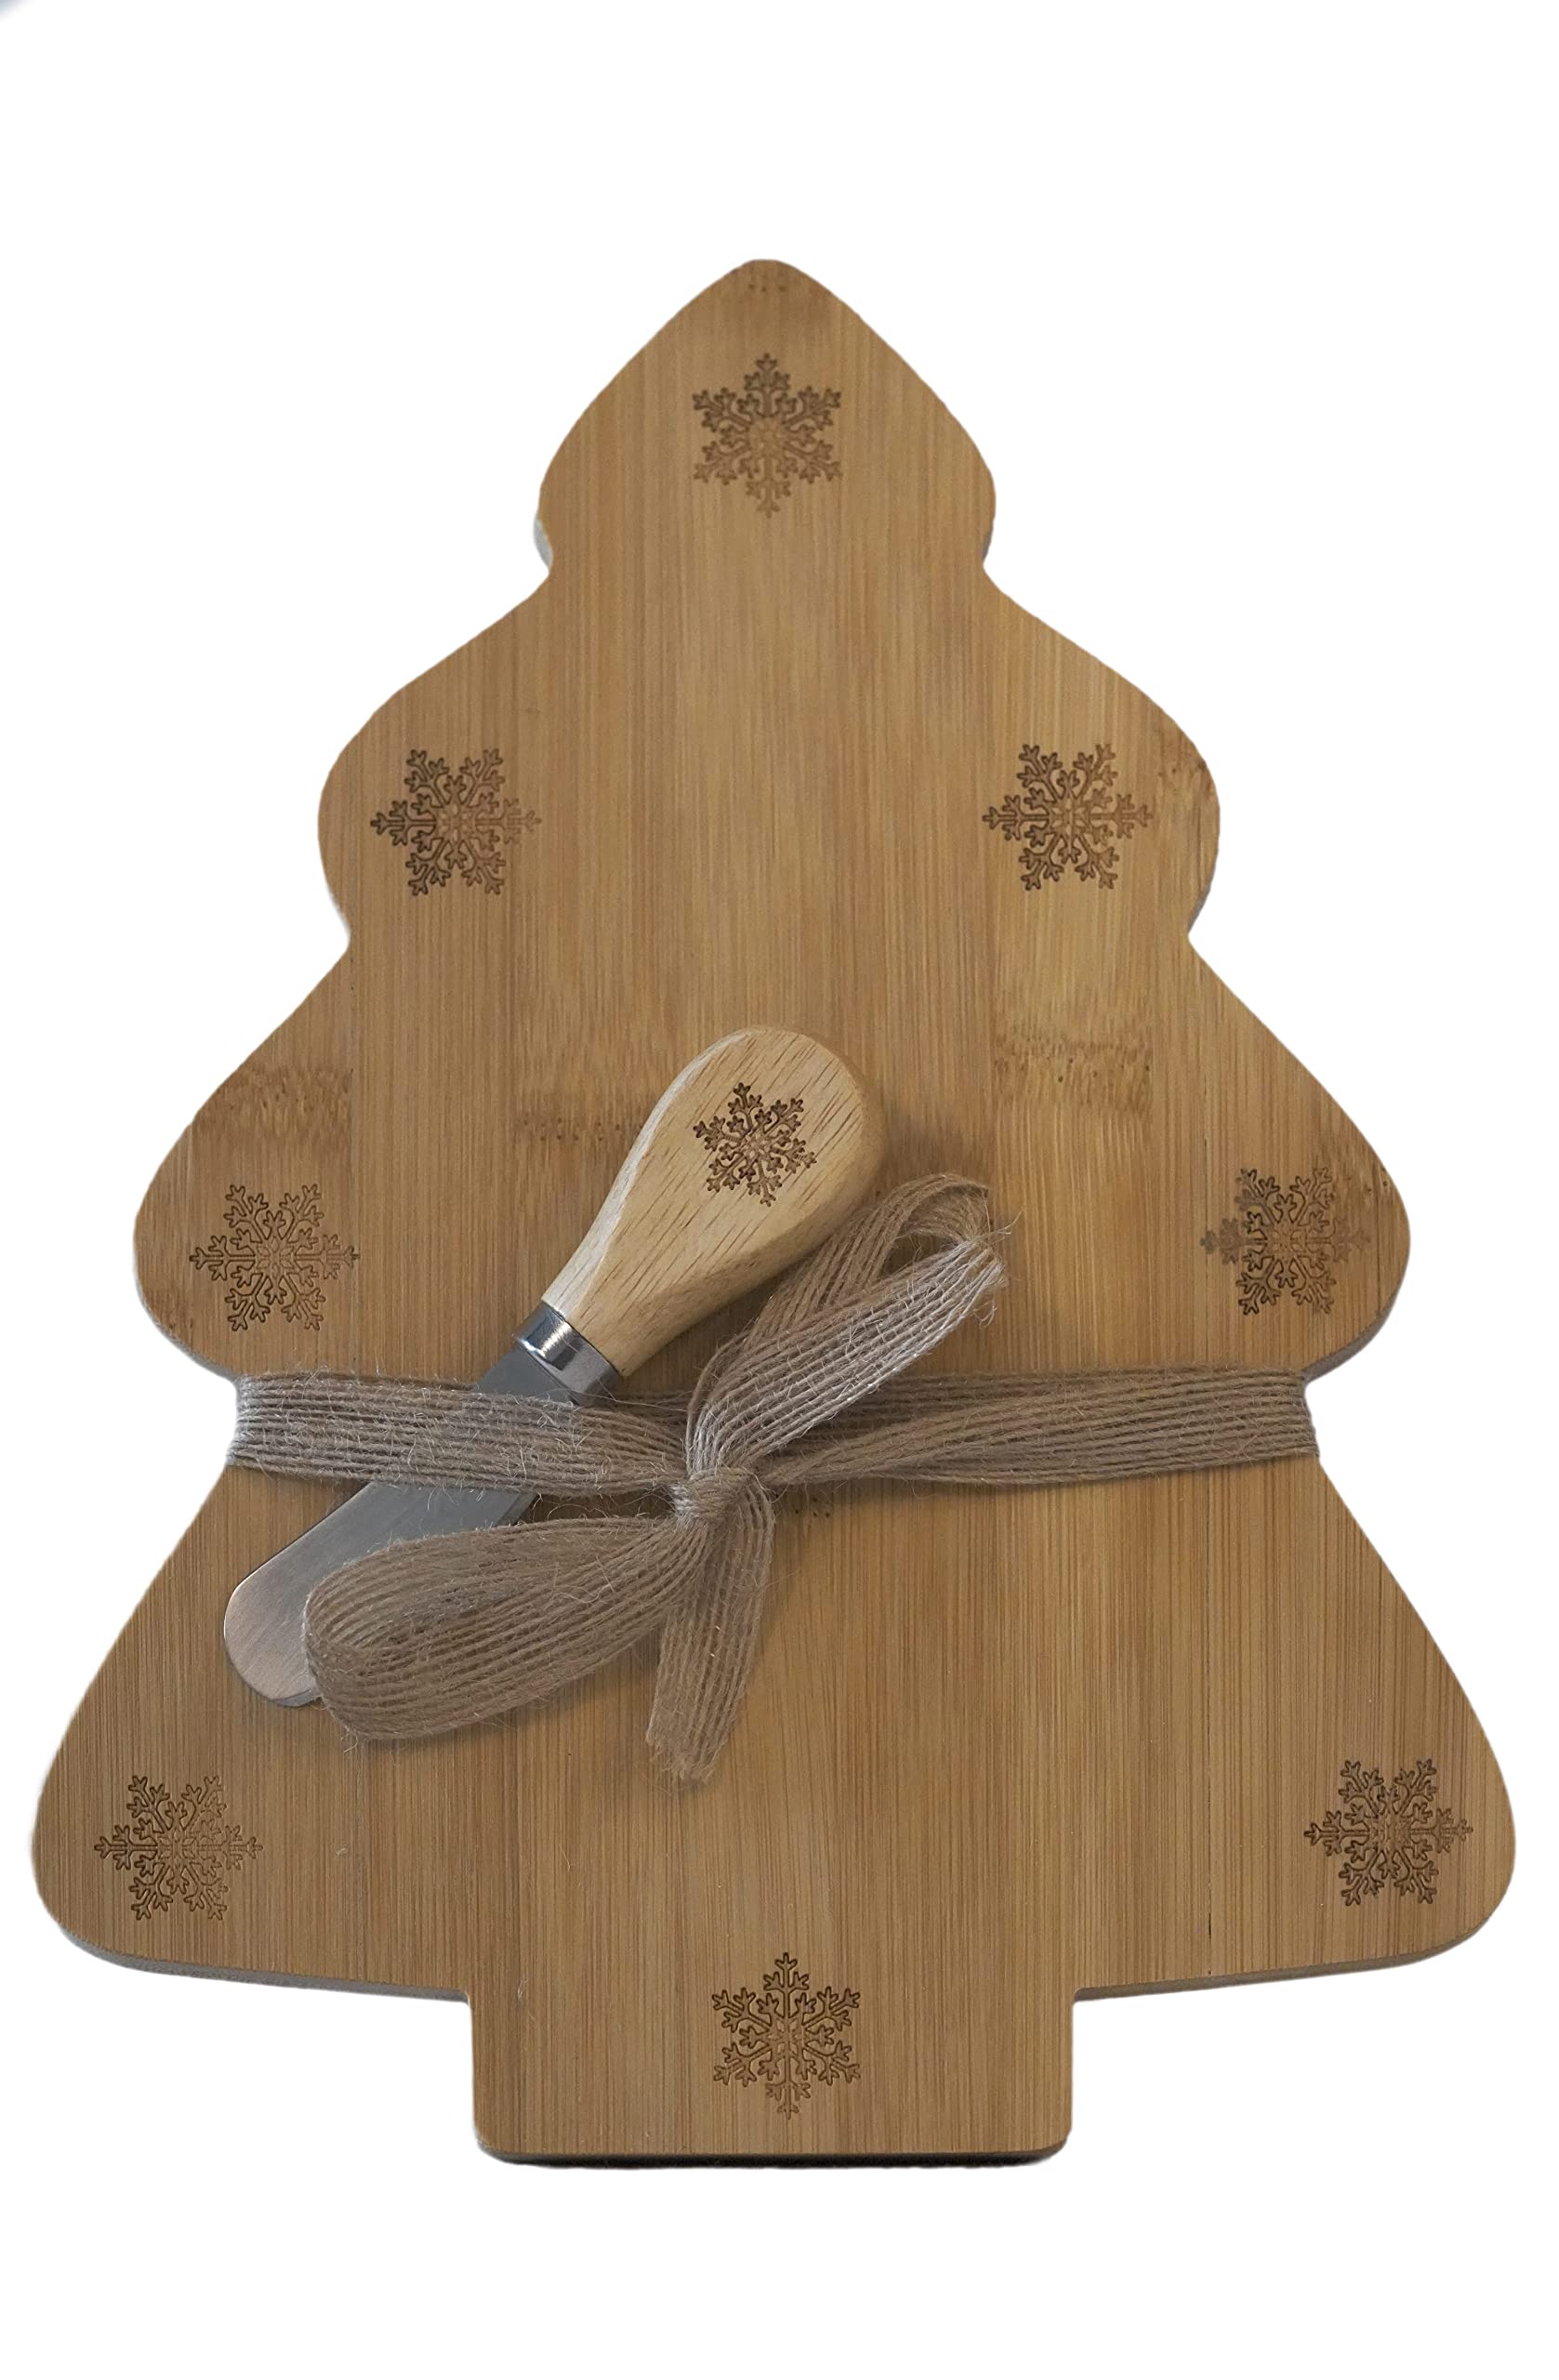 Christmas Tree Charcuterie Board Set with Cheese Knife Cutting Board Made From Natural Sustainably Sourced Bamboo